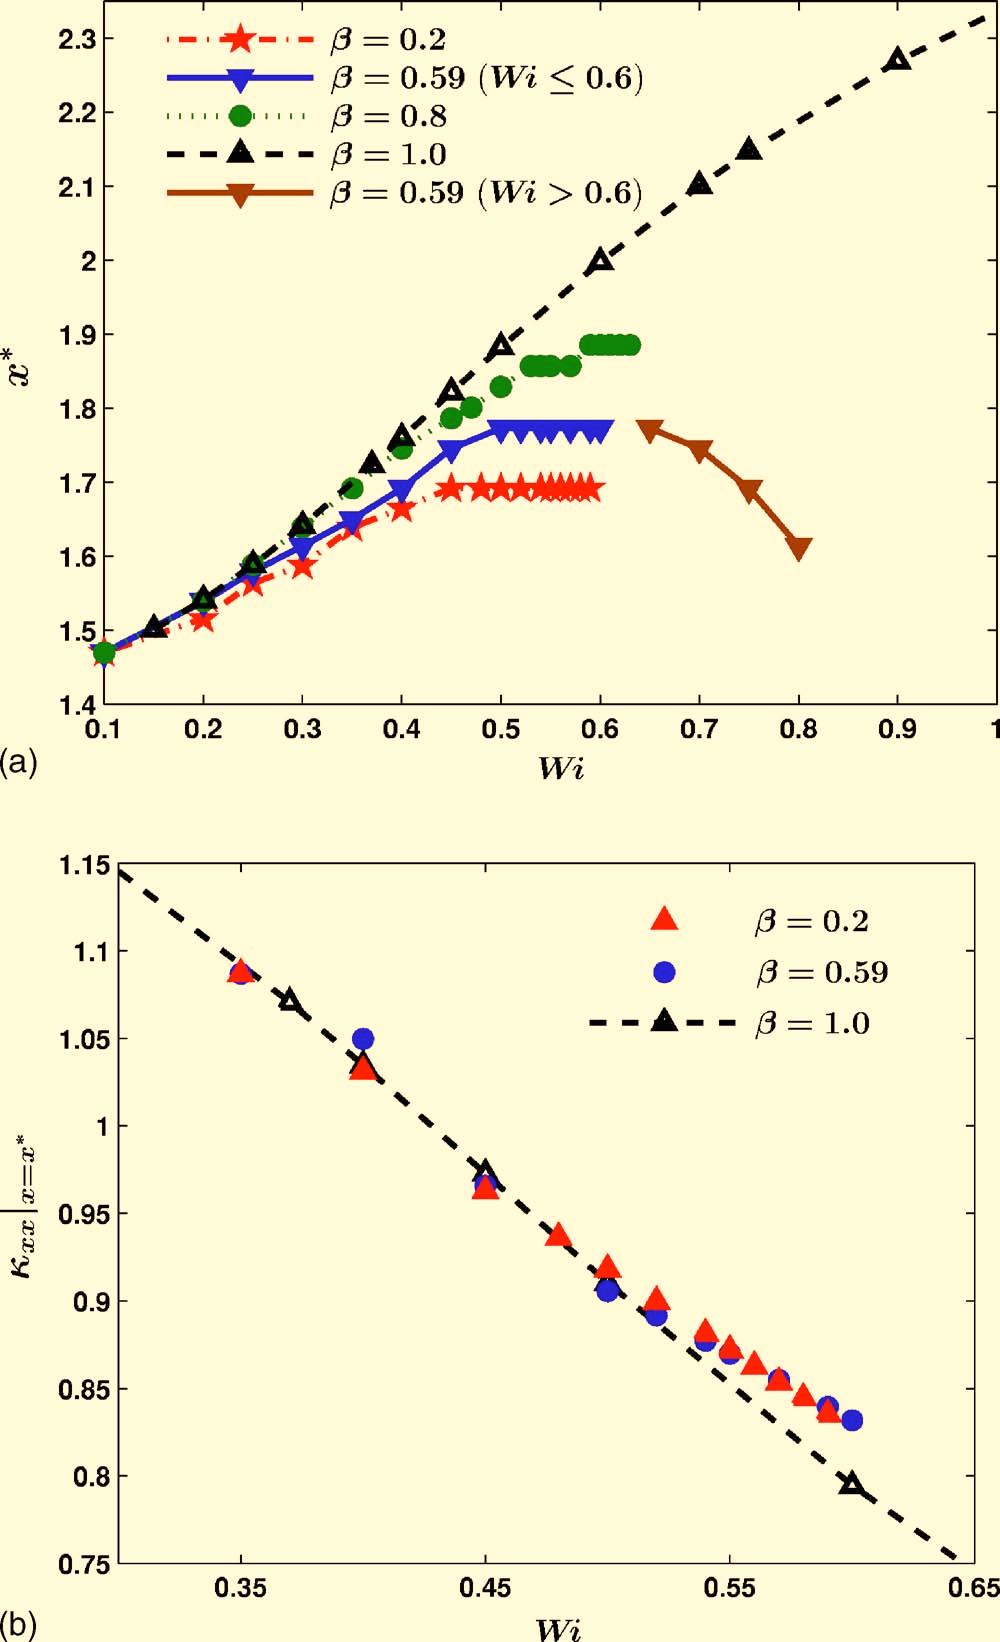 218 BAJAJ, PASQUALI, AND PRAKASH FIG. 15. The dependence on Wi of a the location x * of the maximum in M xx, and b the strain rate xx x=x *, for ultradilute and dilute Oldroyd-B fluids.